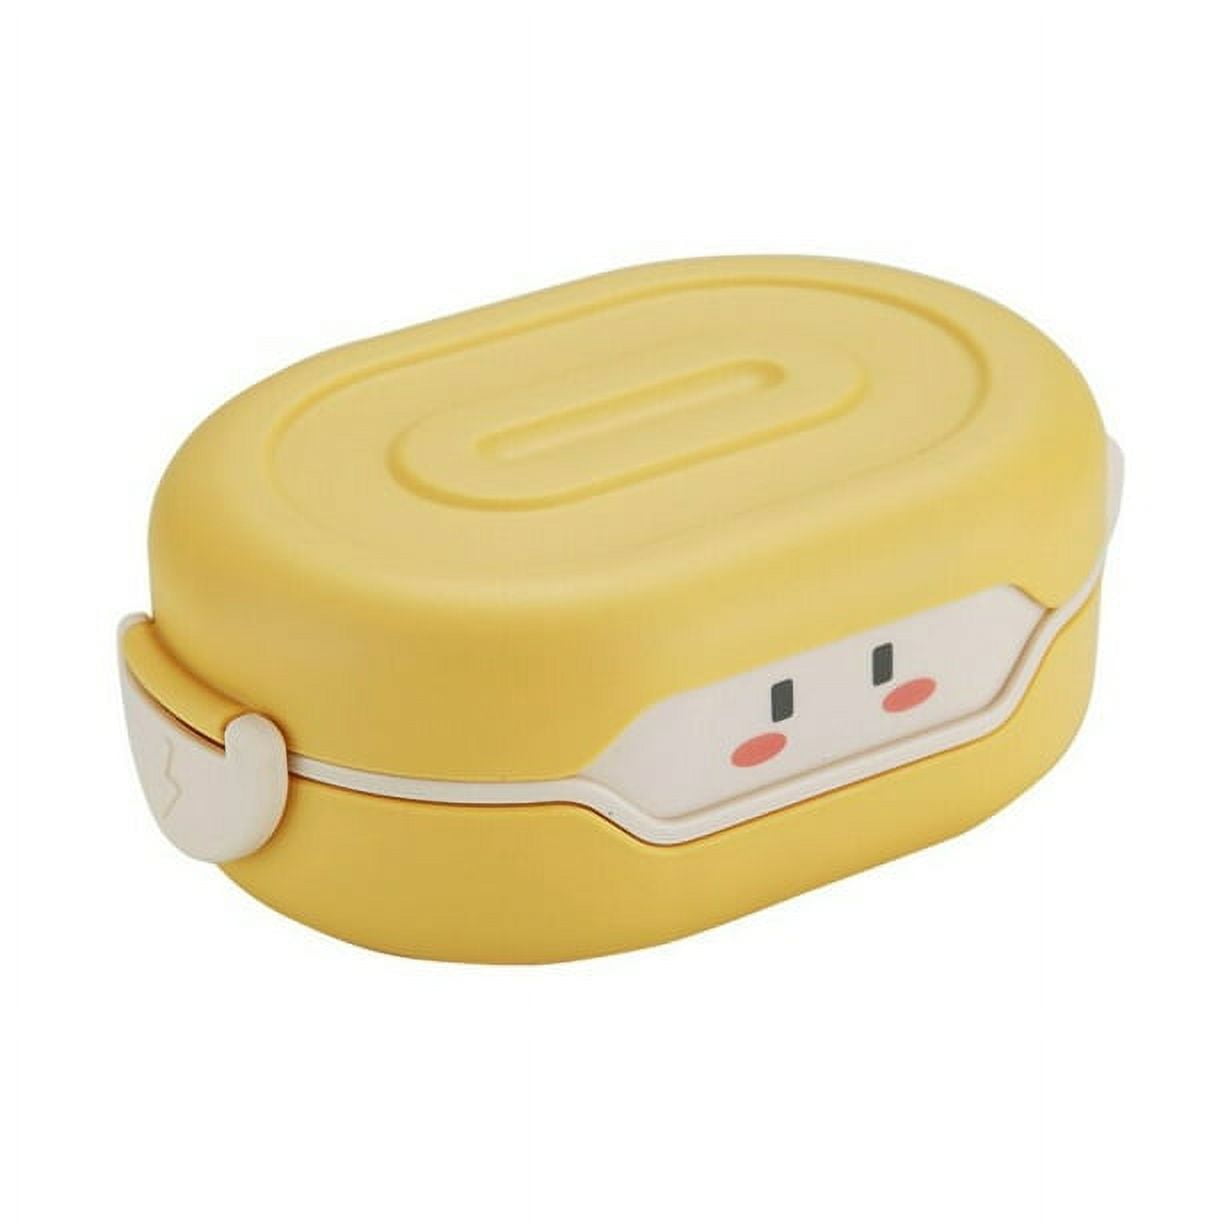 Bento box and accessories review: monbento bento boxes and accessories from  France